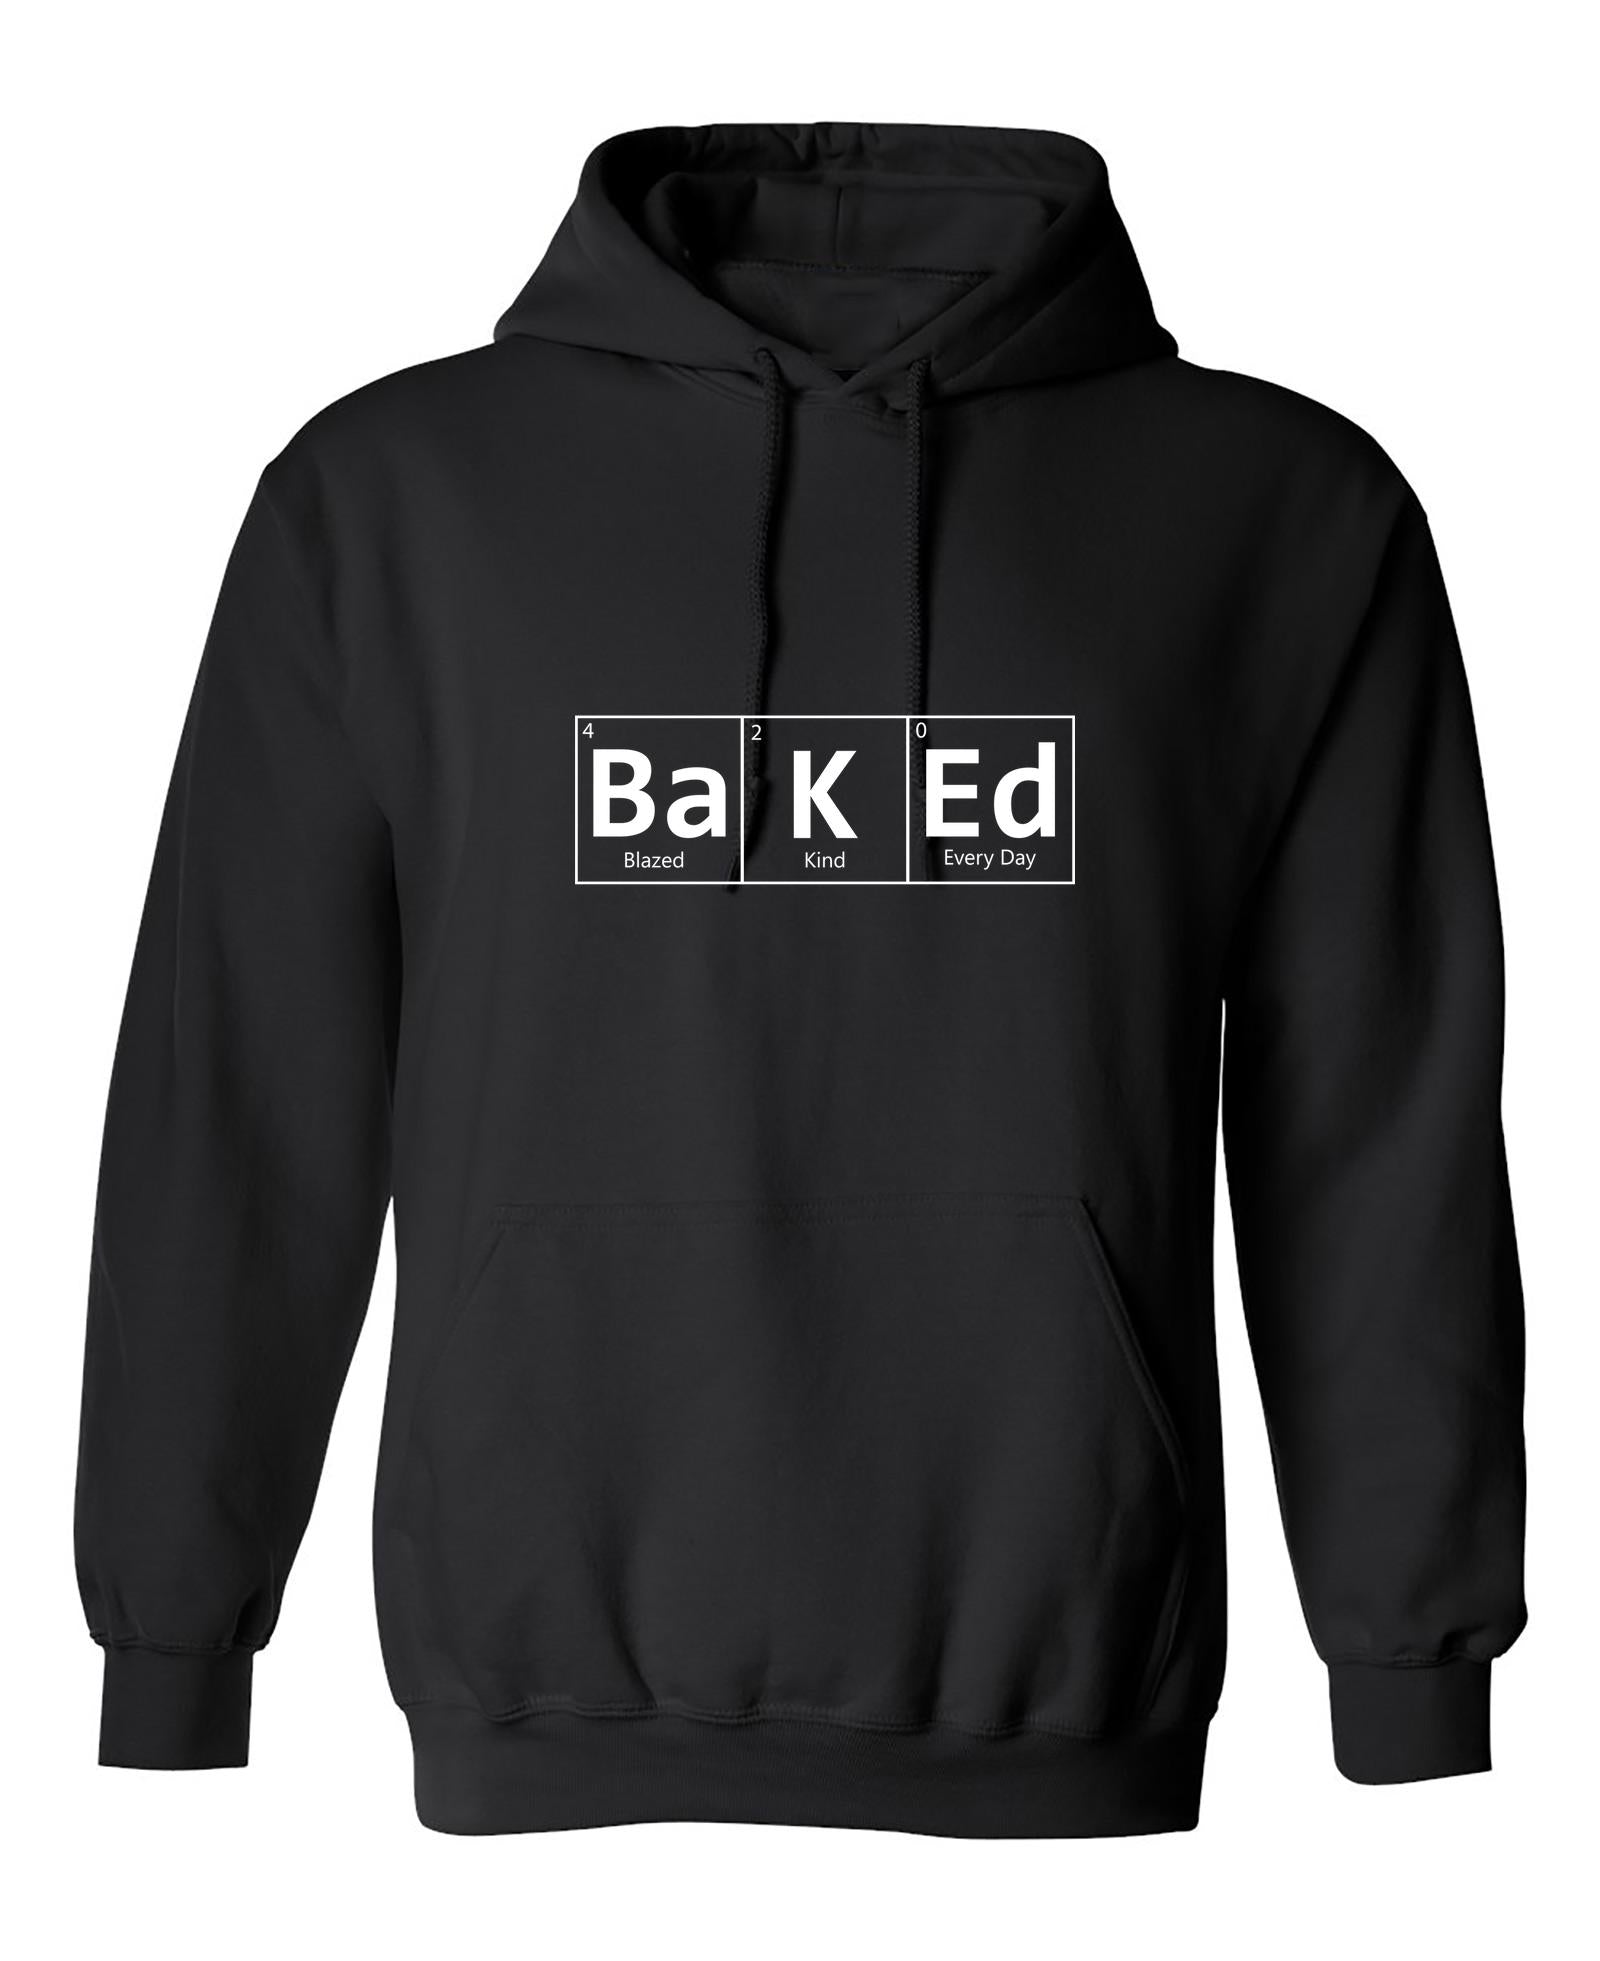 Funny T-Shirts design "PS_0019_BAKED"